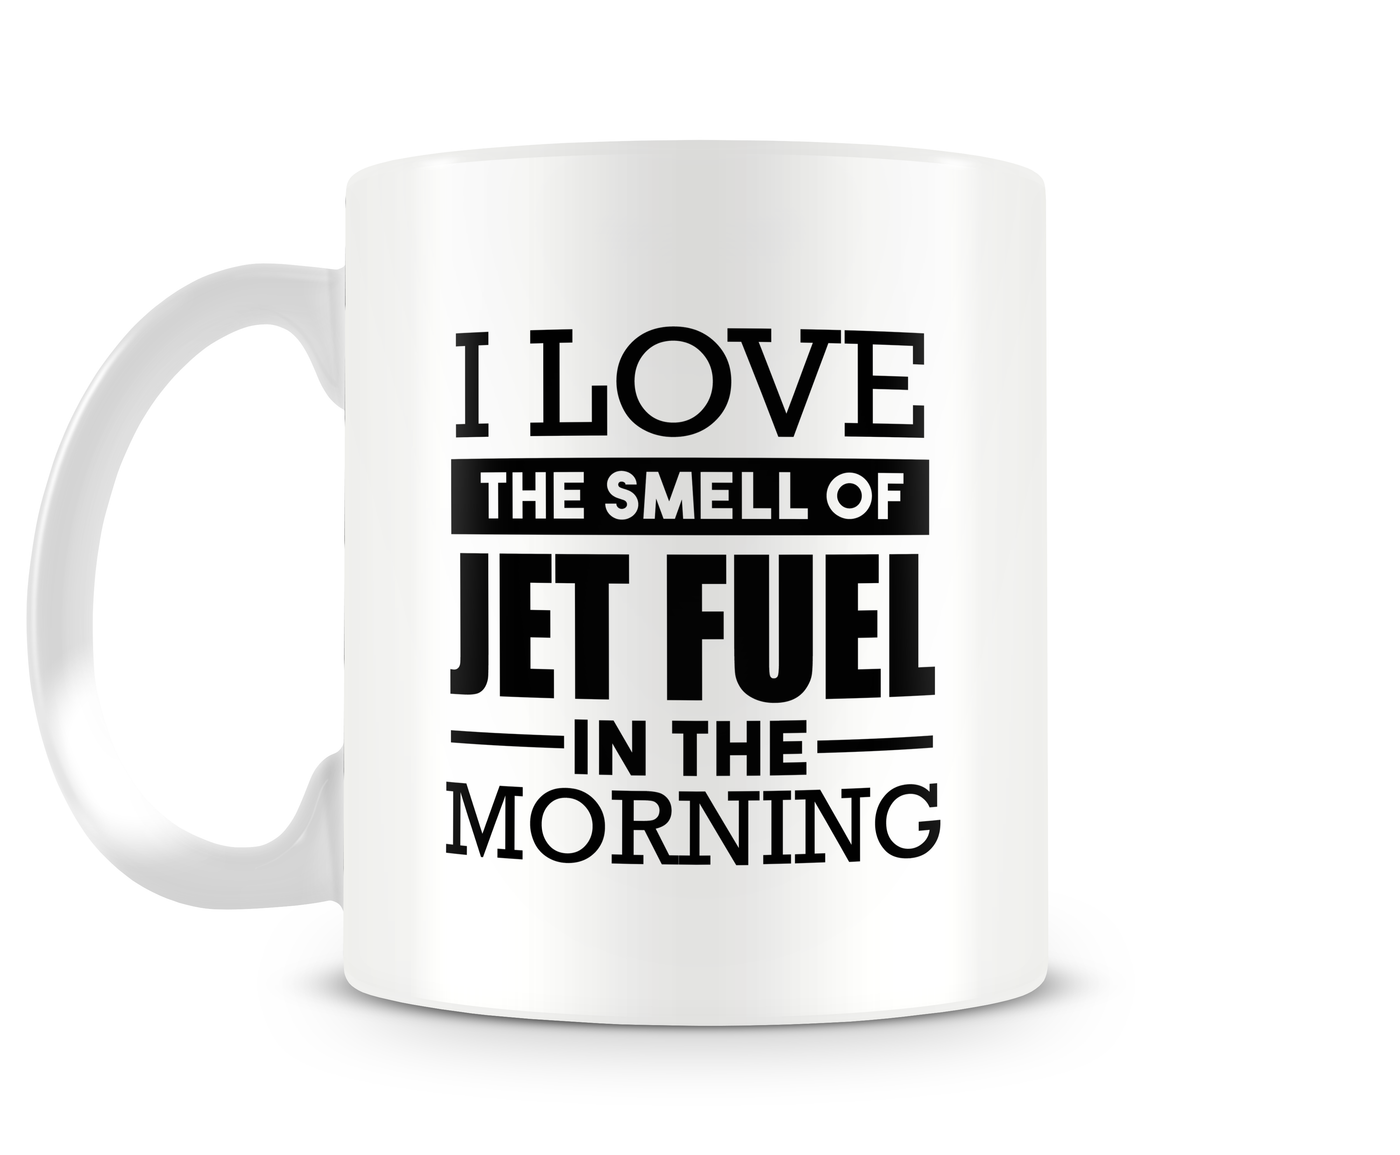 I love the smell of jet fuel in the morning mug